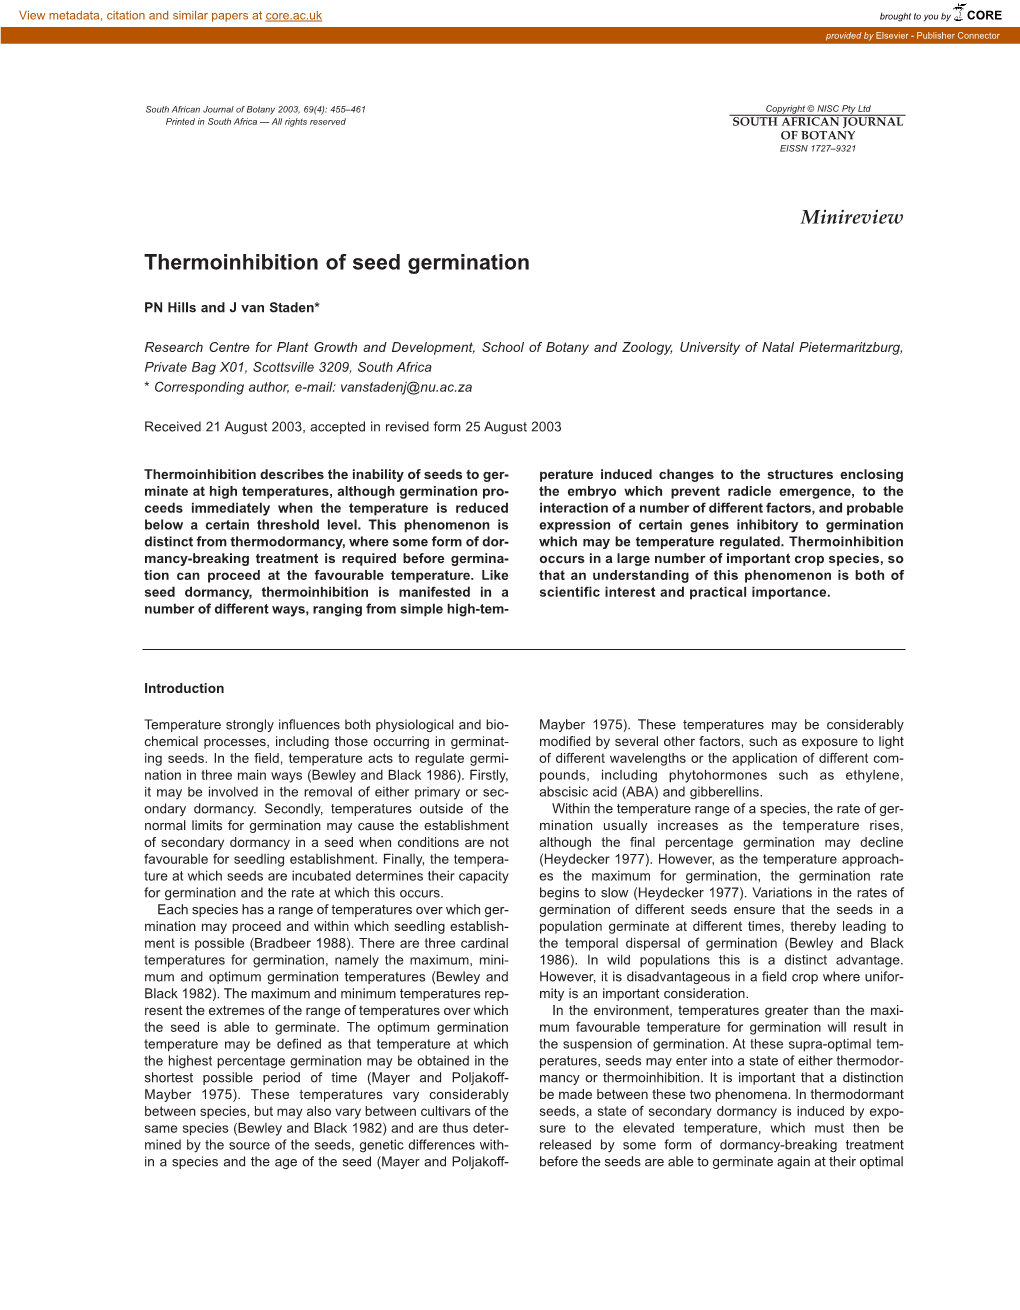 Thermoinhibition of Seed Germination